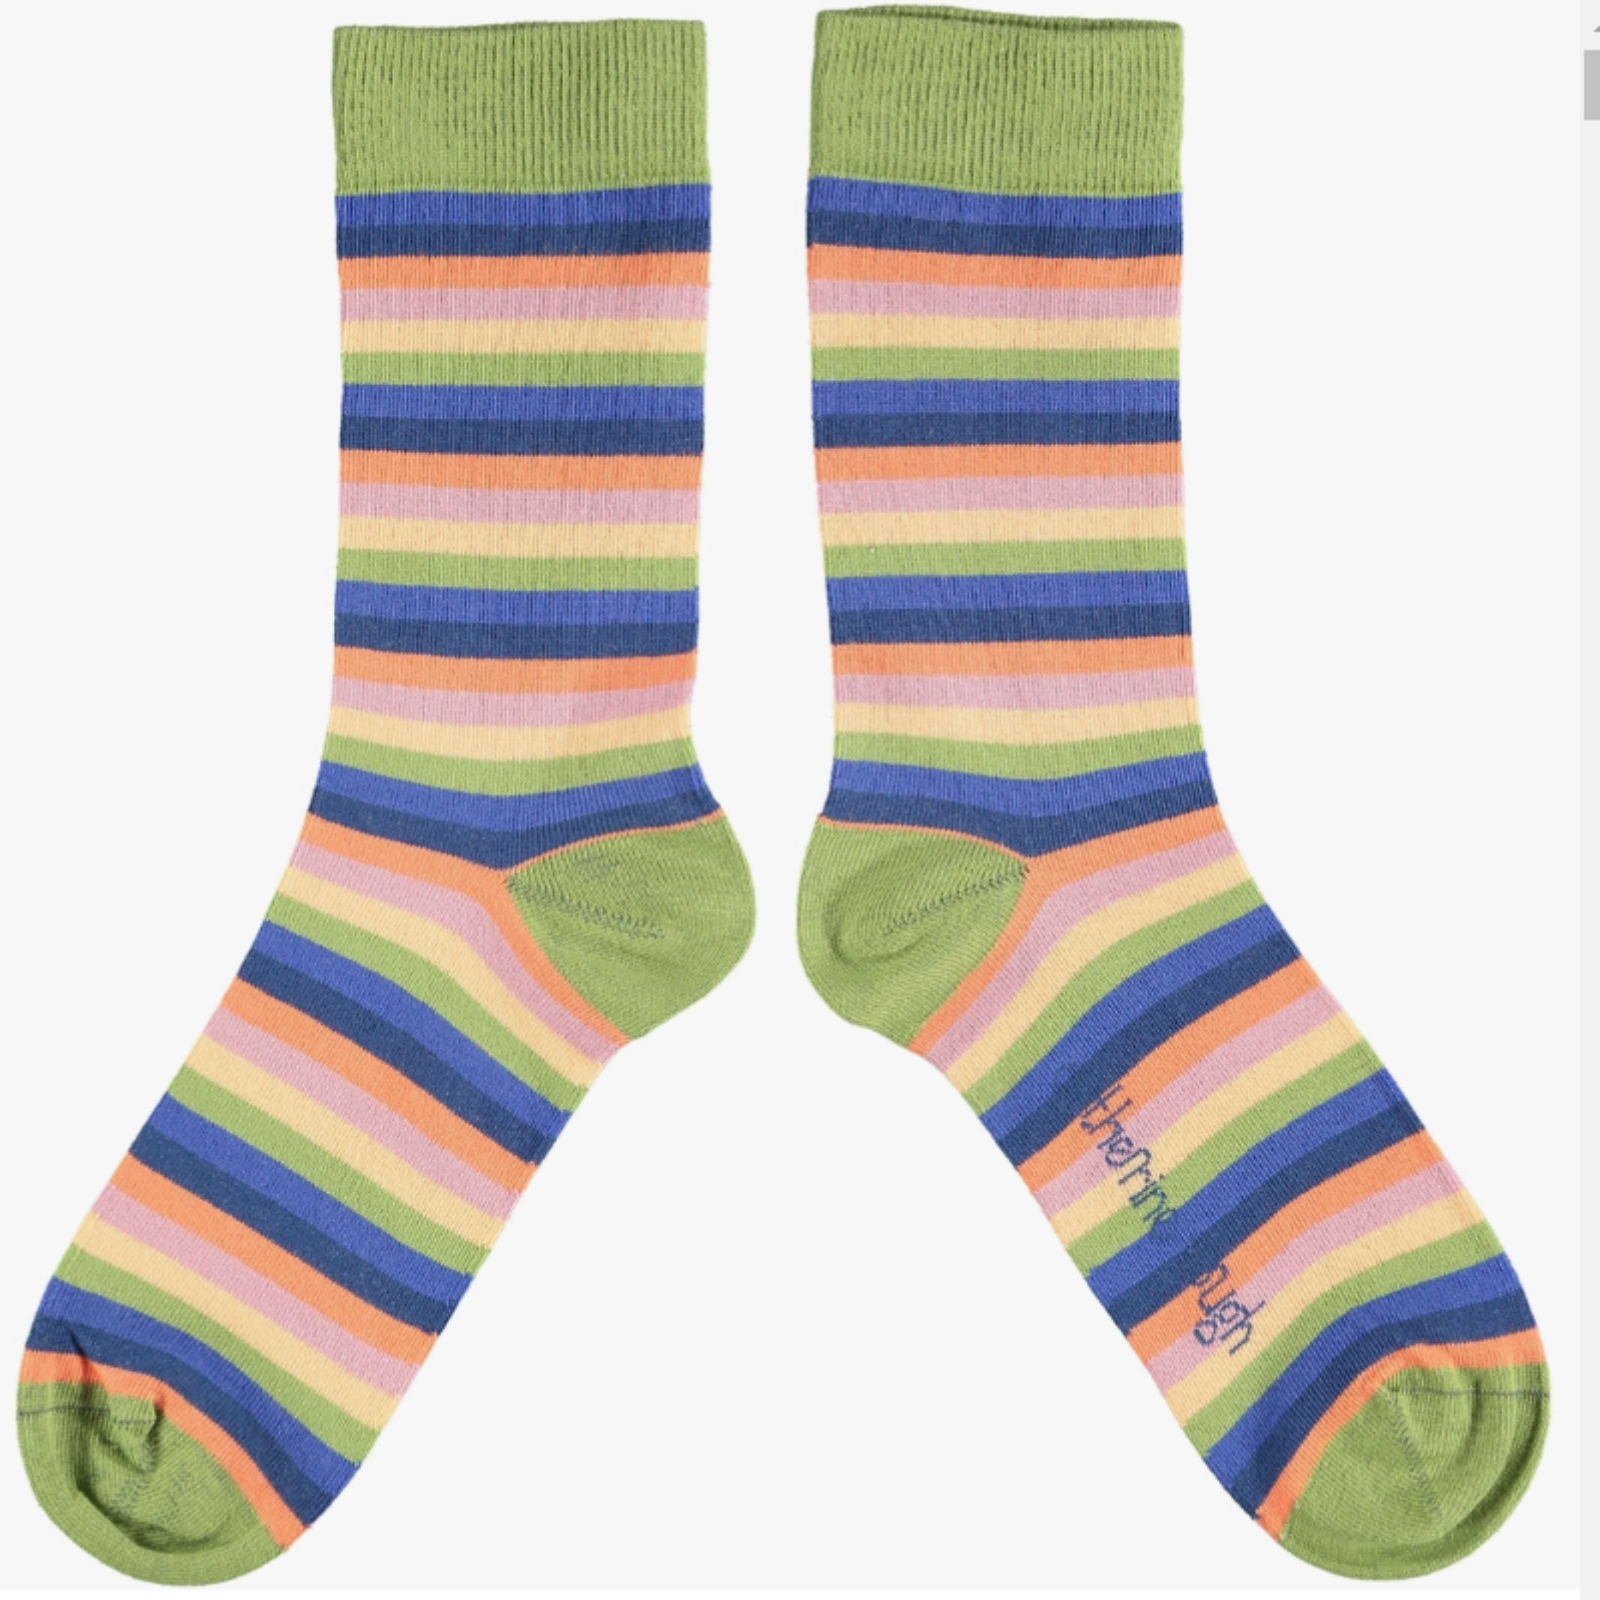 Catherine Tough Multi-Stripe cotton women's crew socks. The design features blue, green, pink and more stripes framed with soft green cuffs, heels & toes.